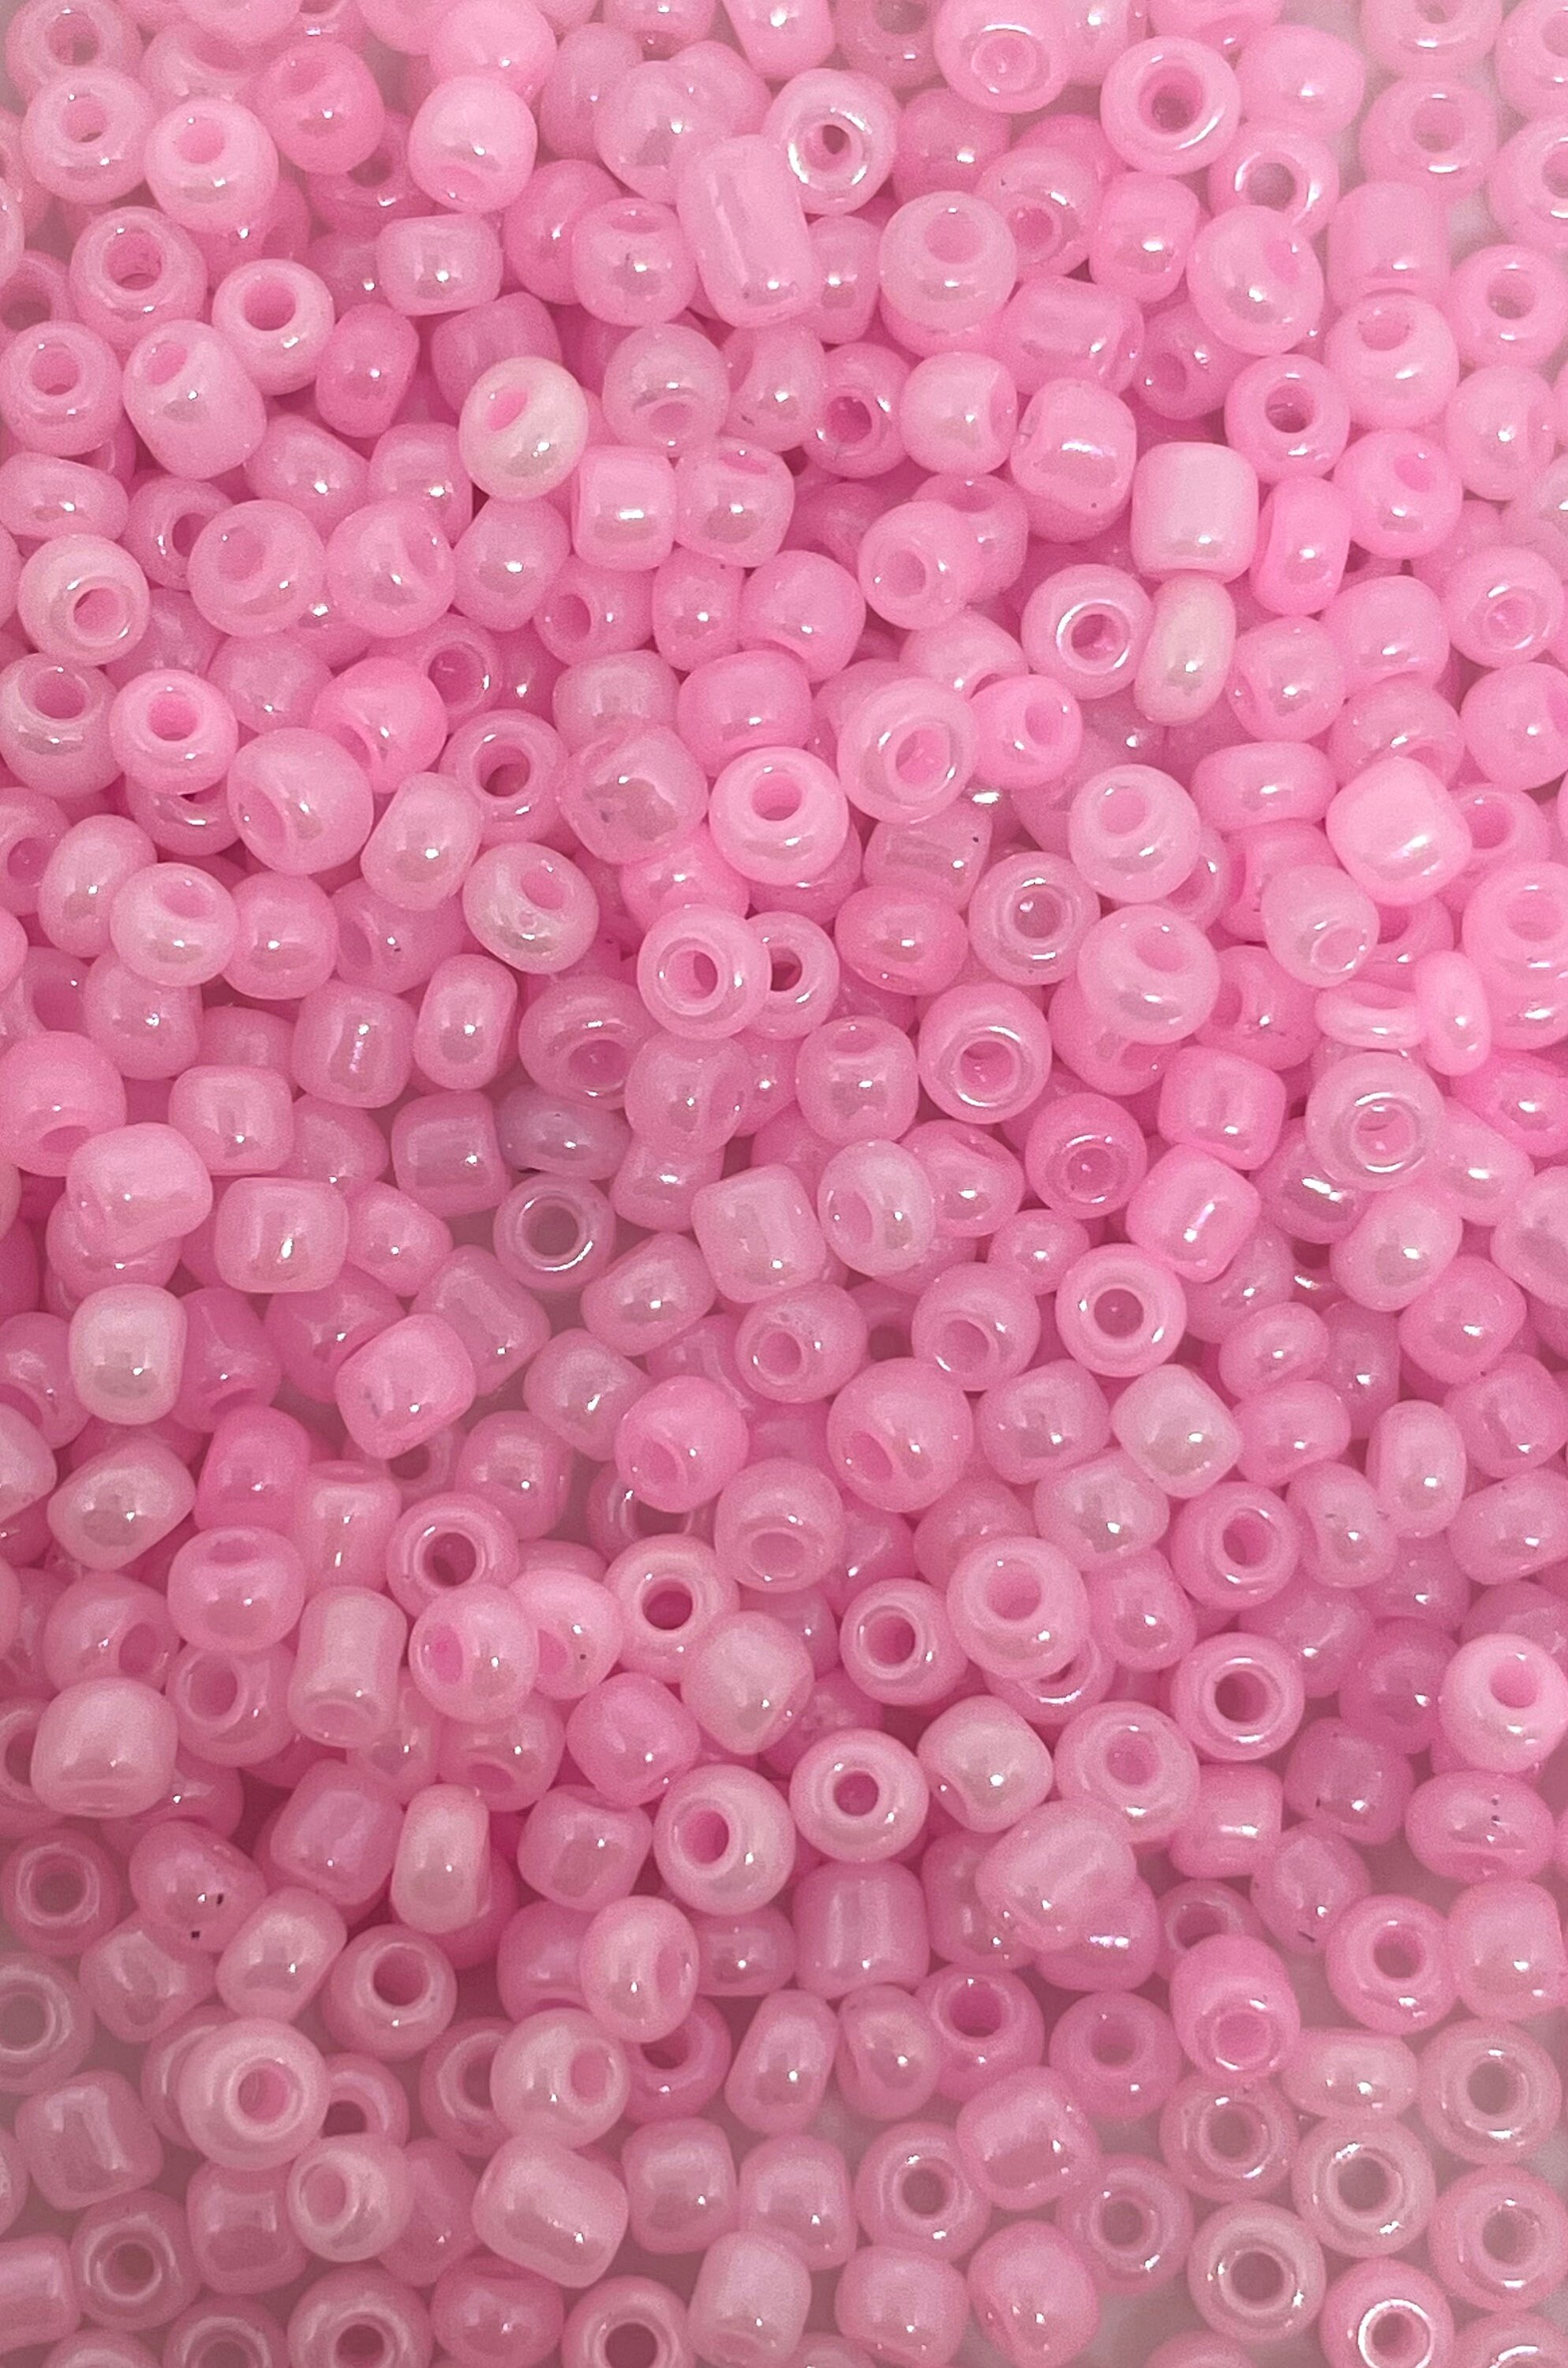 2mm Glass Seed Beads | Pearlised Pink Small Bead Supplies | Bracelet Beads  | Weaving & Embroidery Jewellery Making (Around 1700pcs / 25 grams)